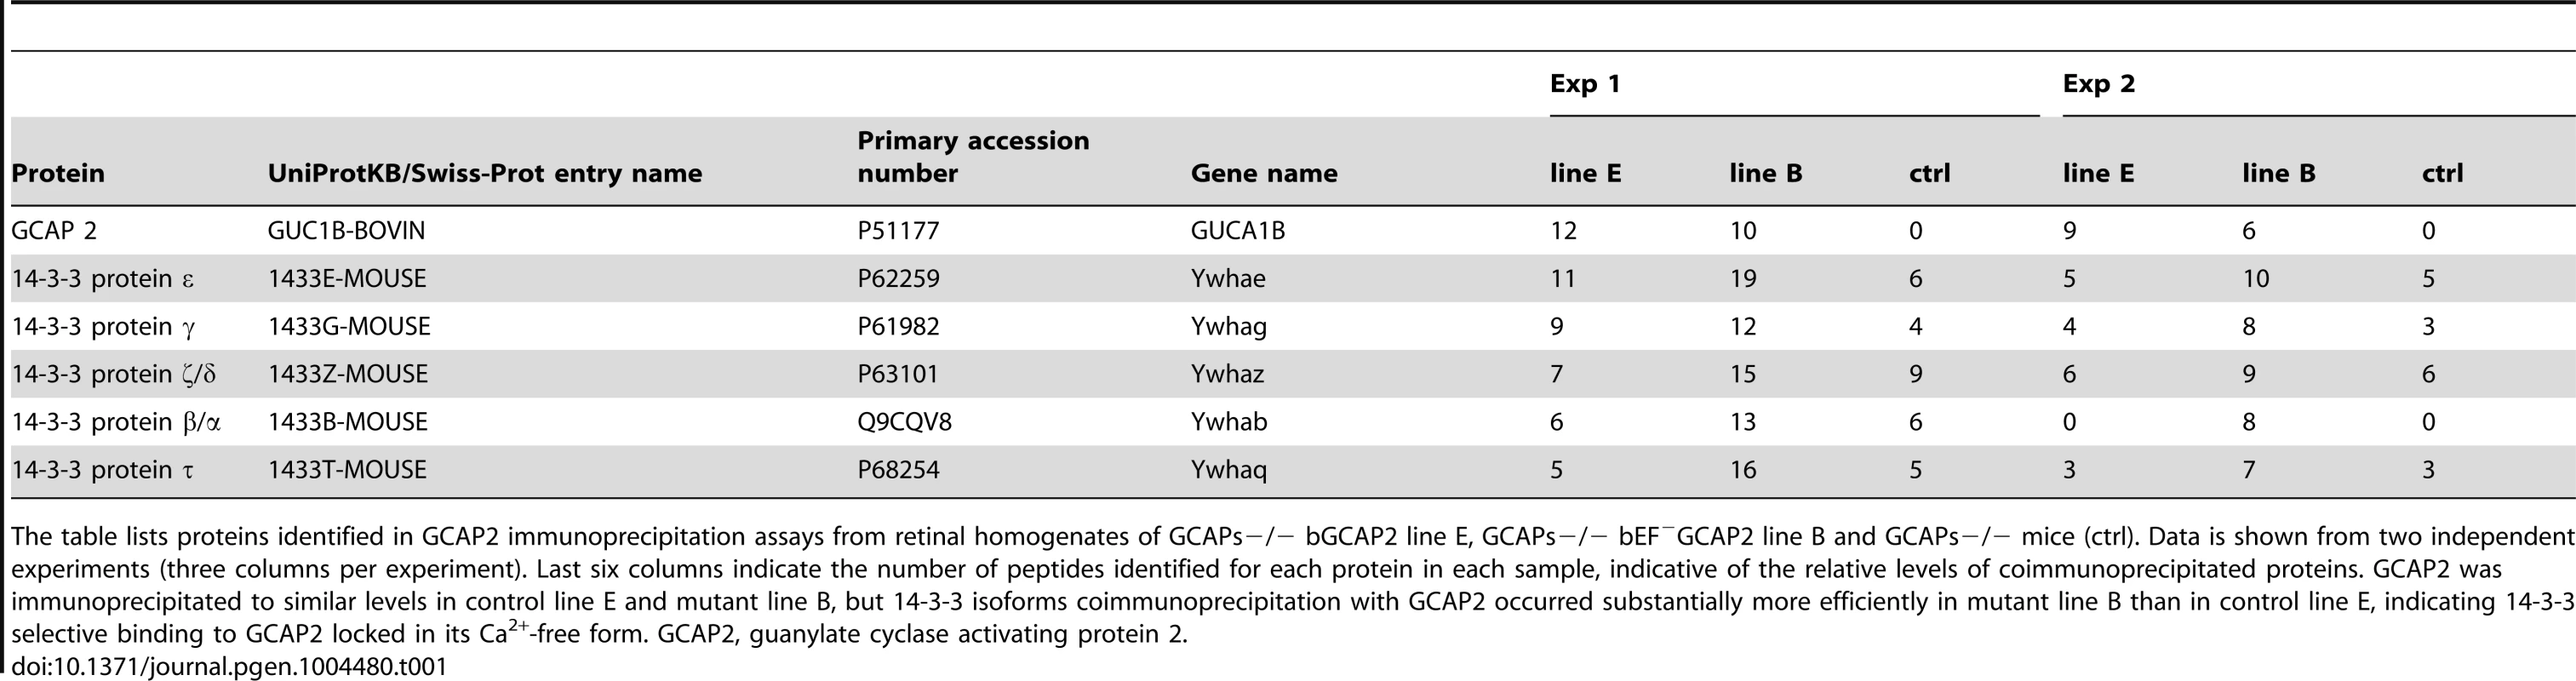 Proteins identified by LC-MS/MS in GCAP2 immunoprecipitation experiments.